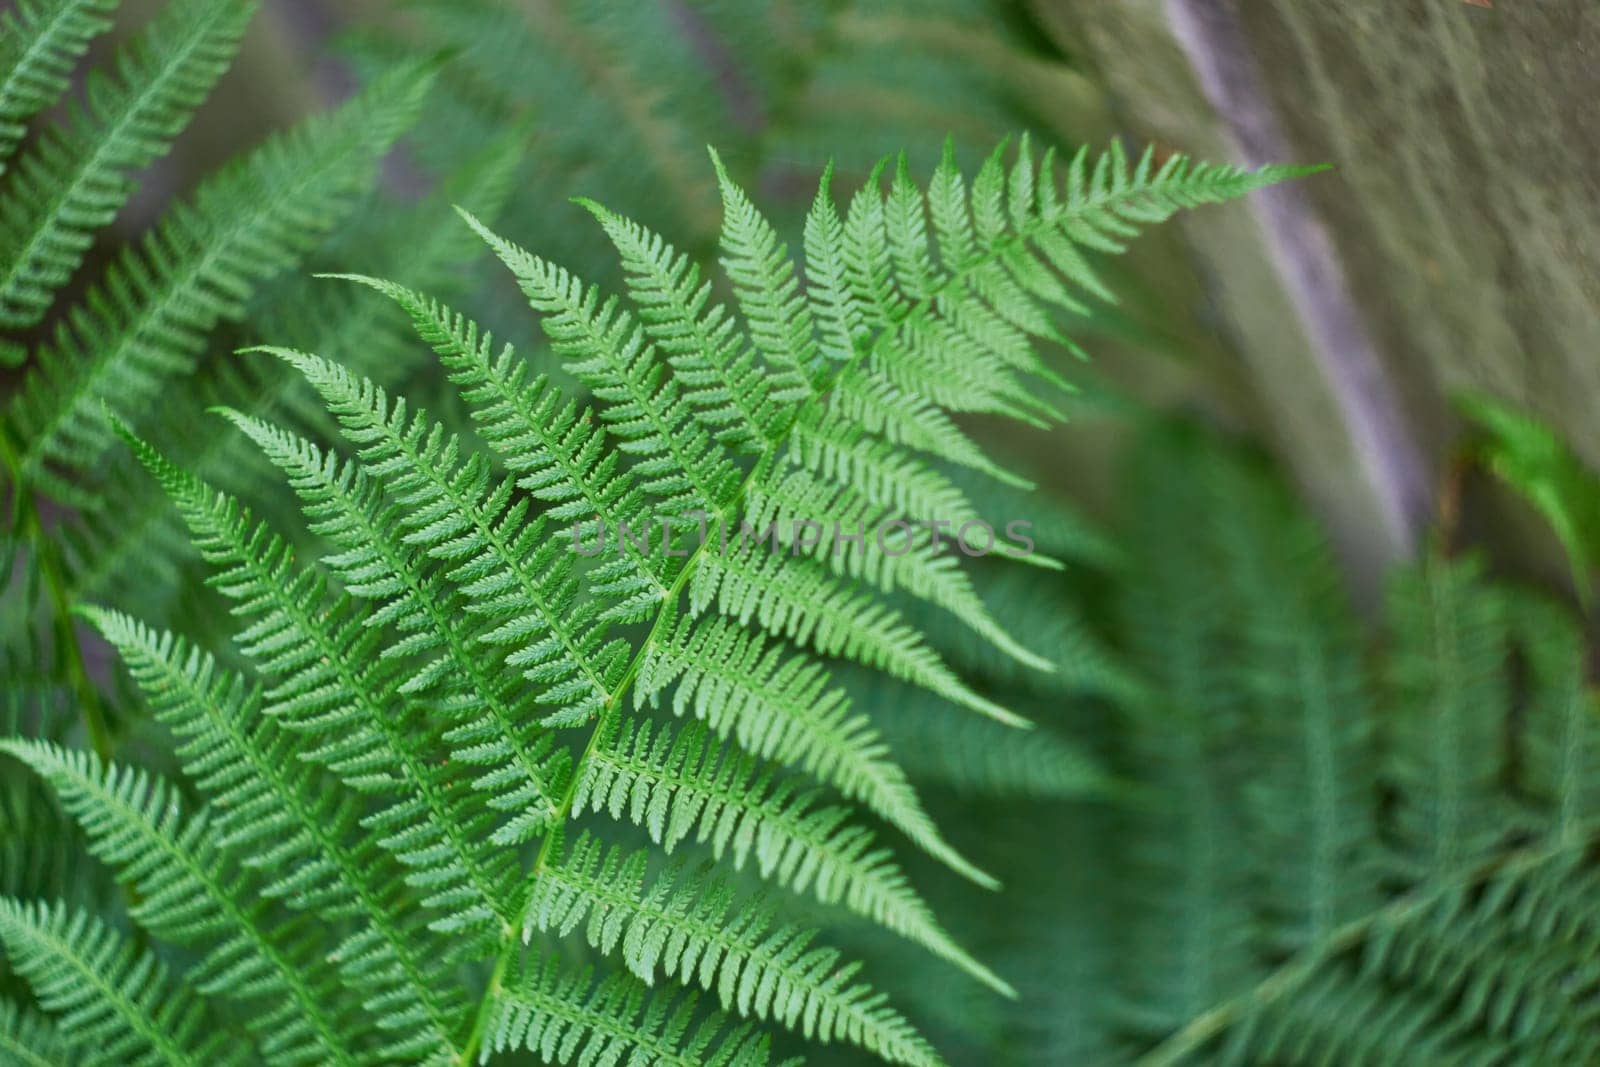 Photograph of leaf of green fern herbal plant. Nature. Plants.